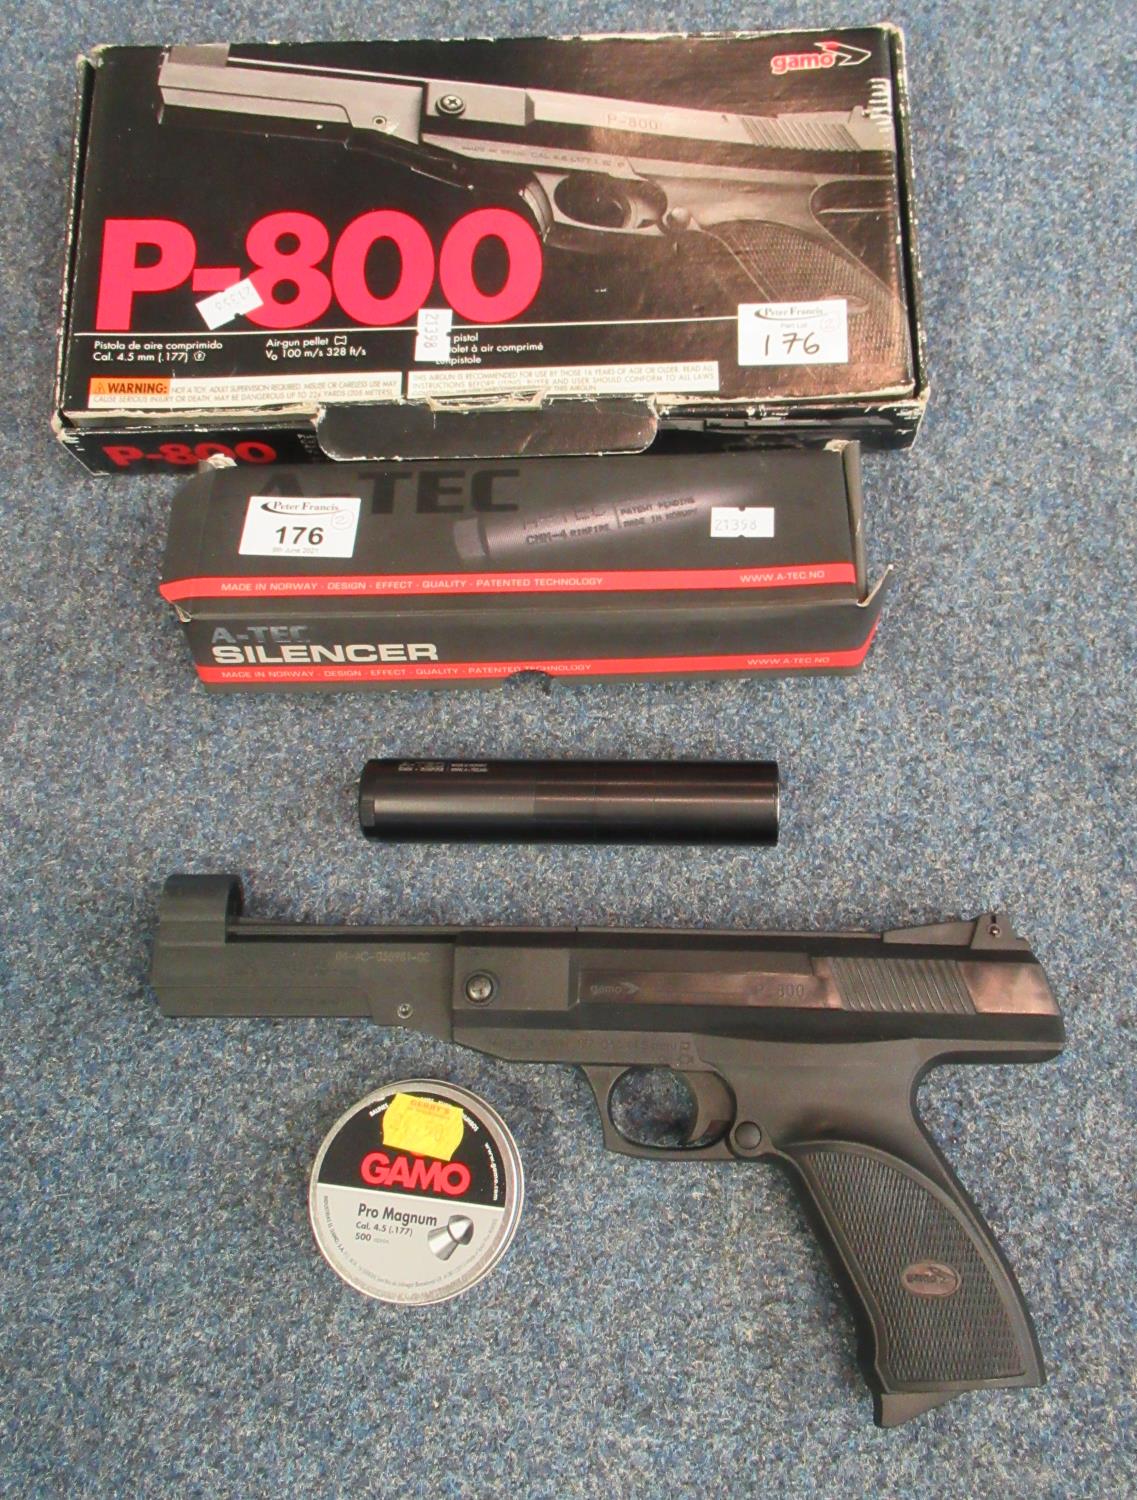 P-800 .177 air pistol, break action with pellets and an A-TEC air rifle silencer.